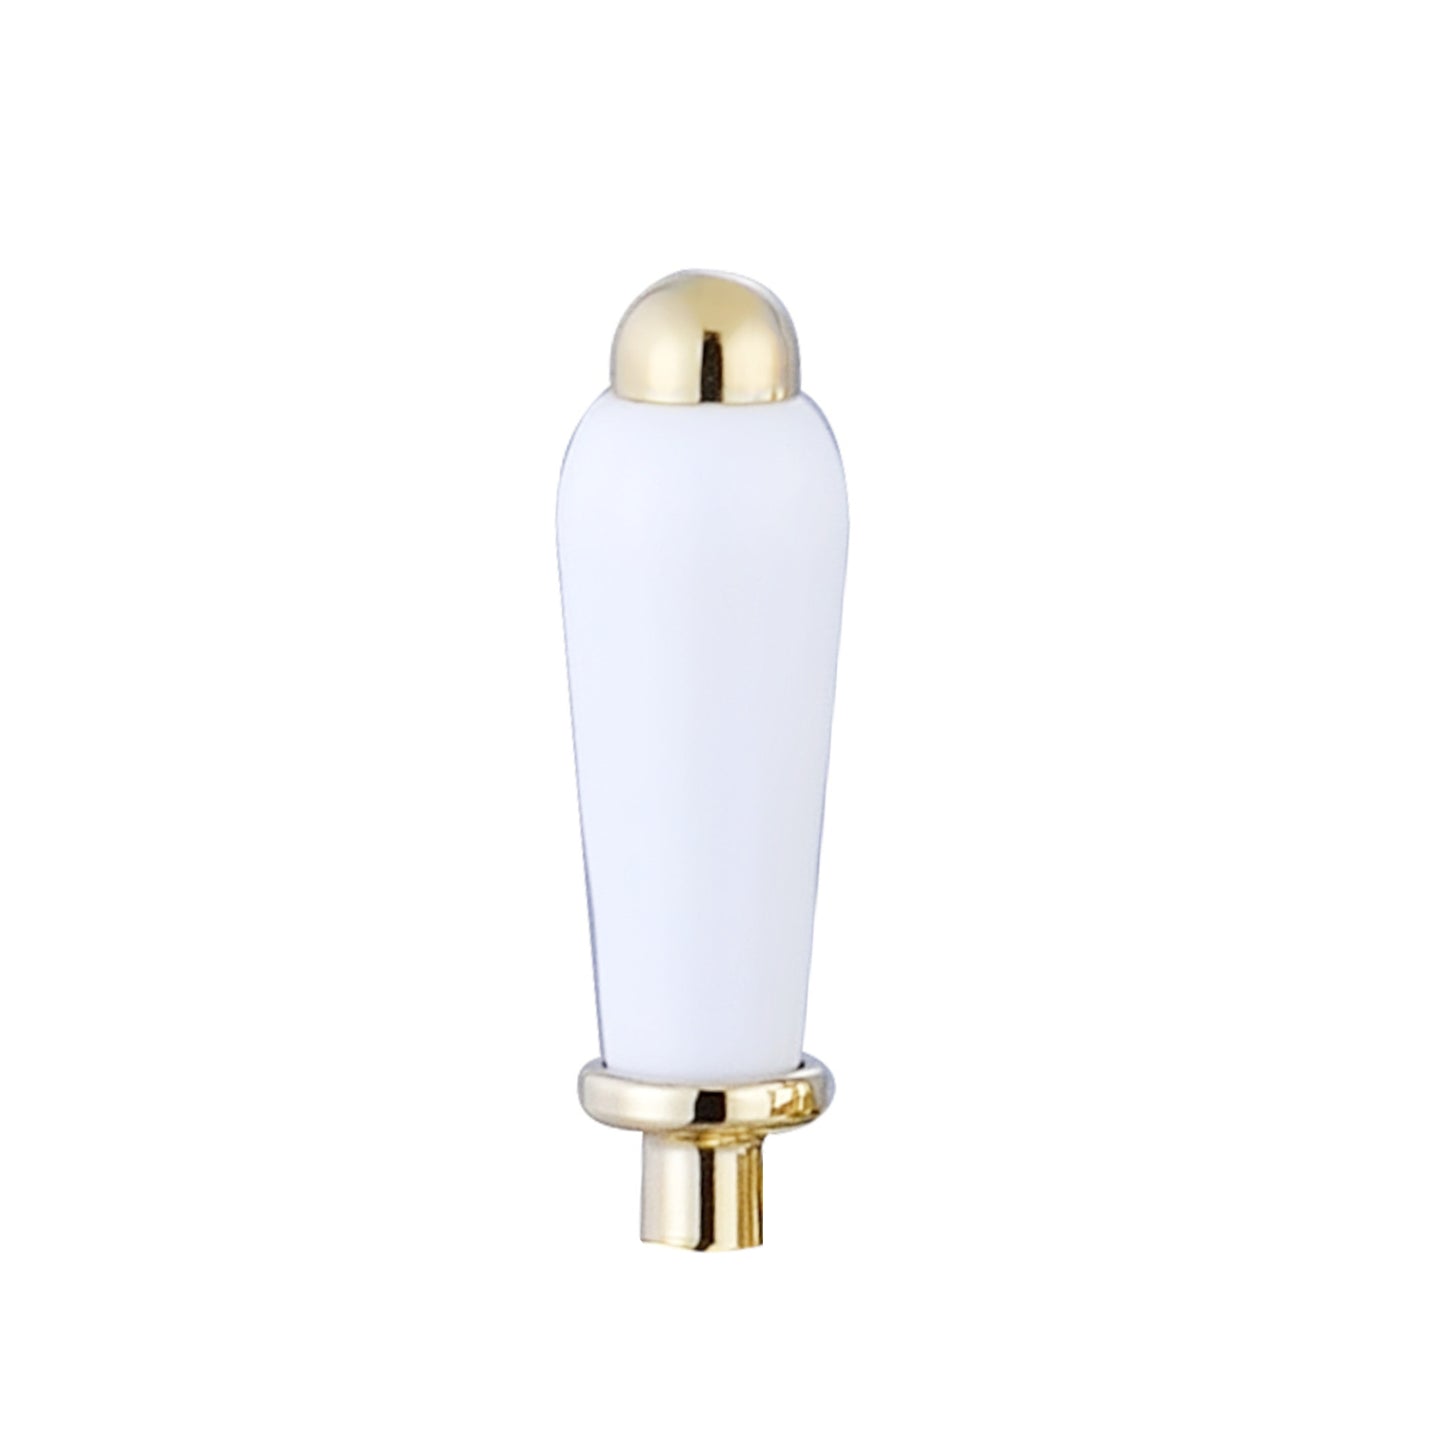 Single lever with white ceramic for Downton basin or bath tap - gold